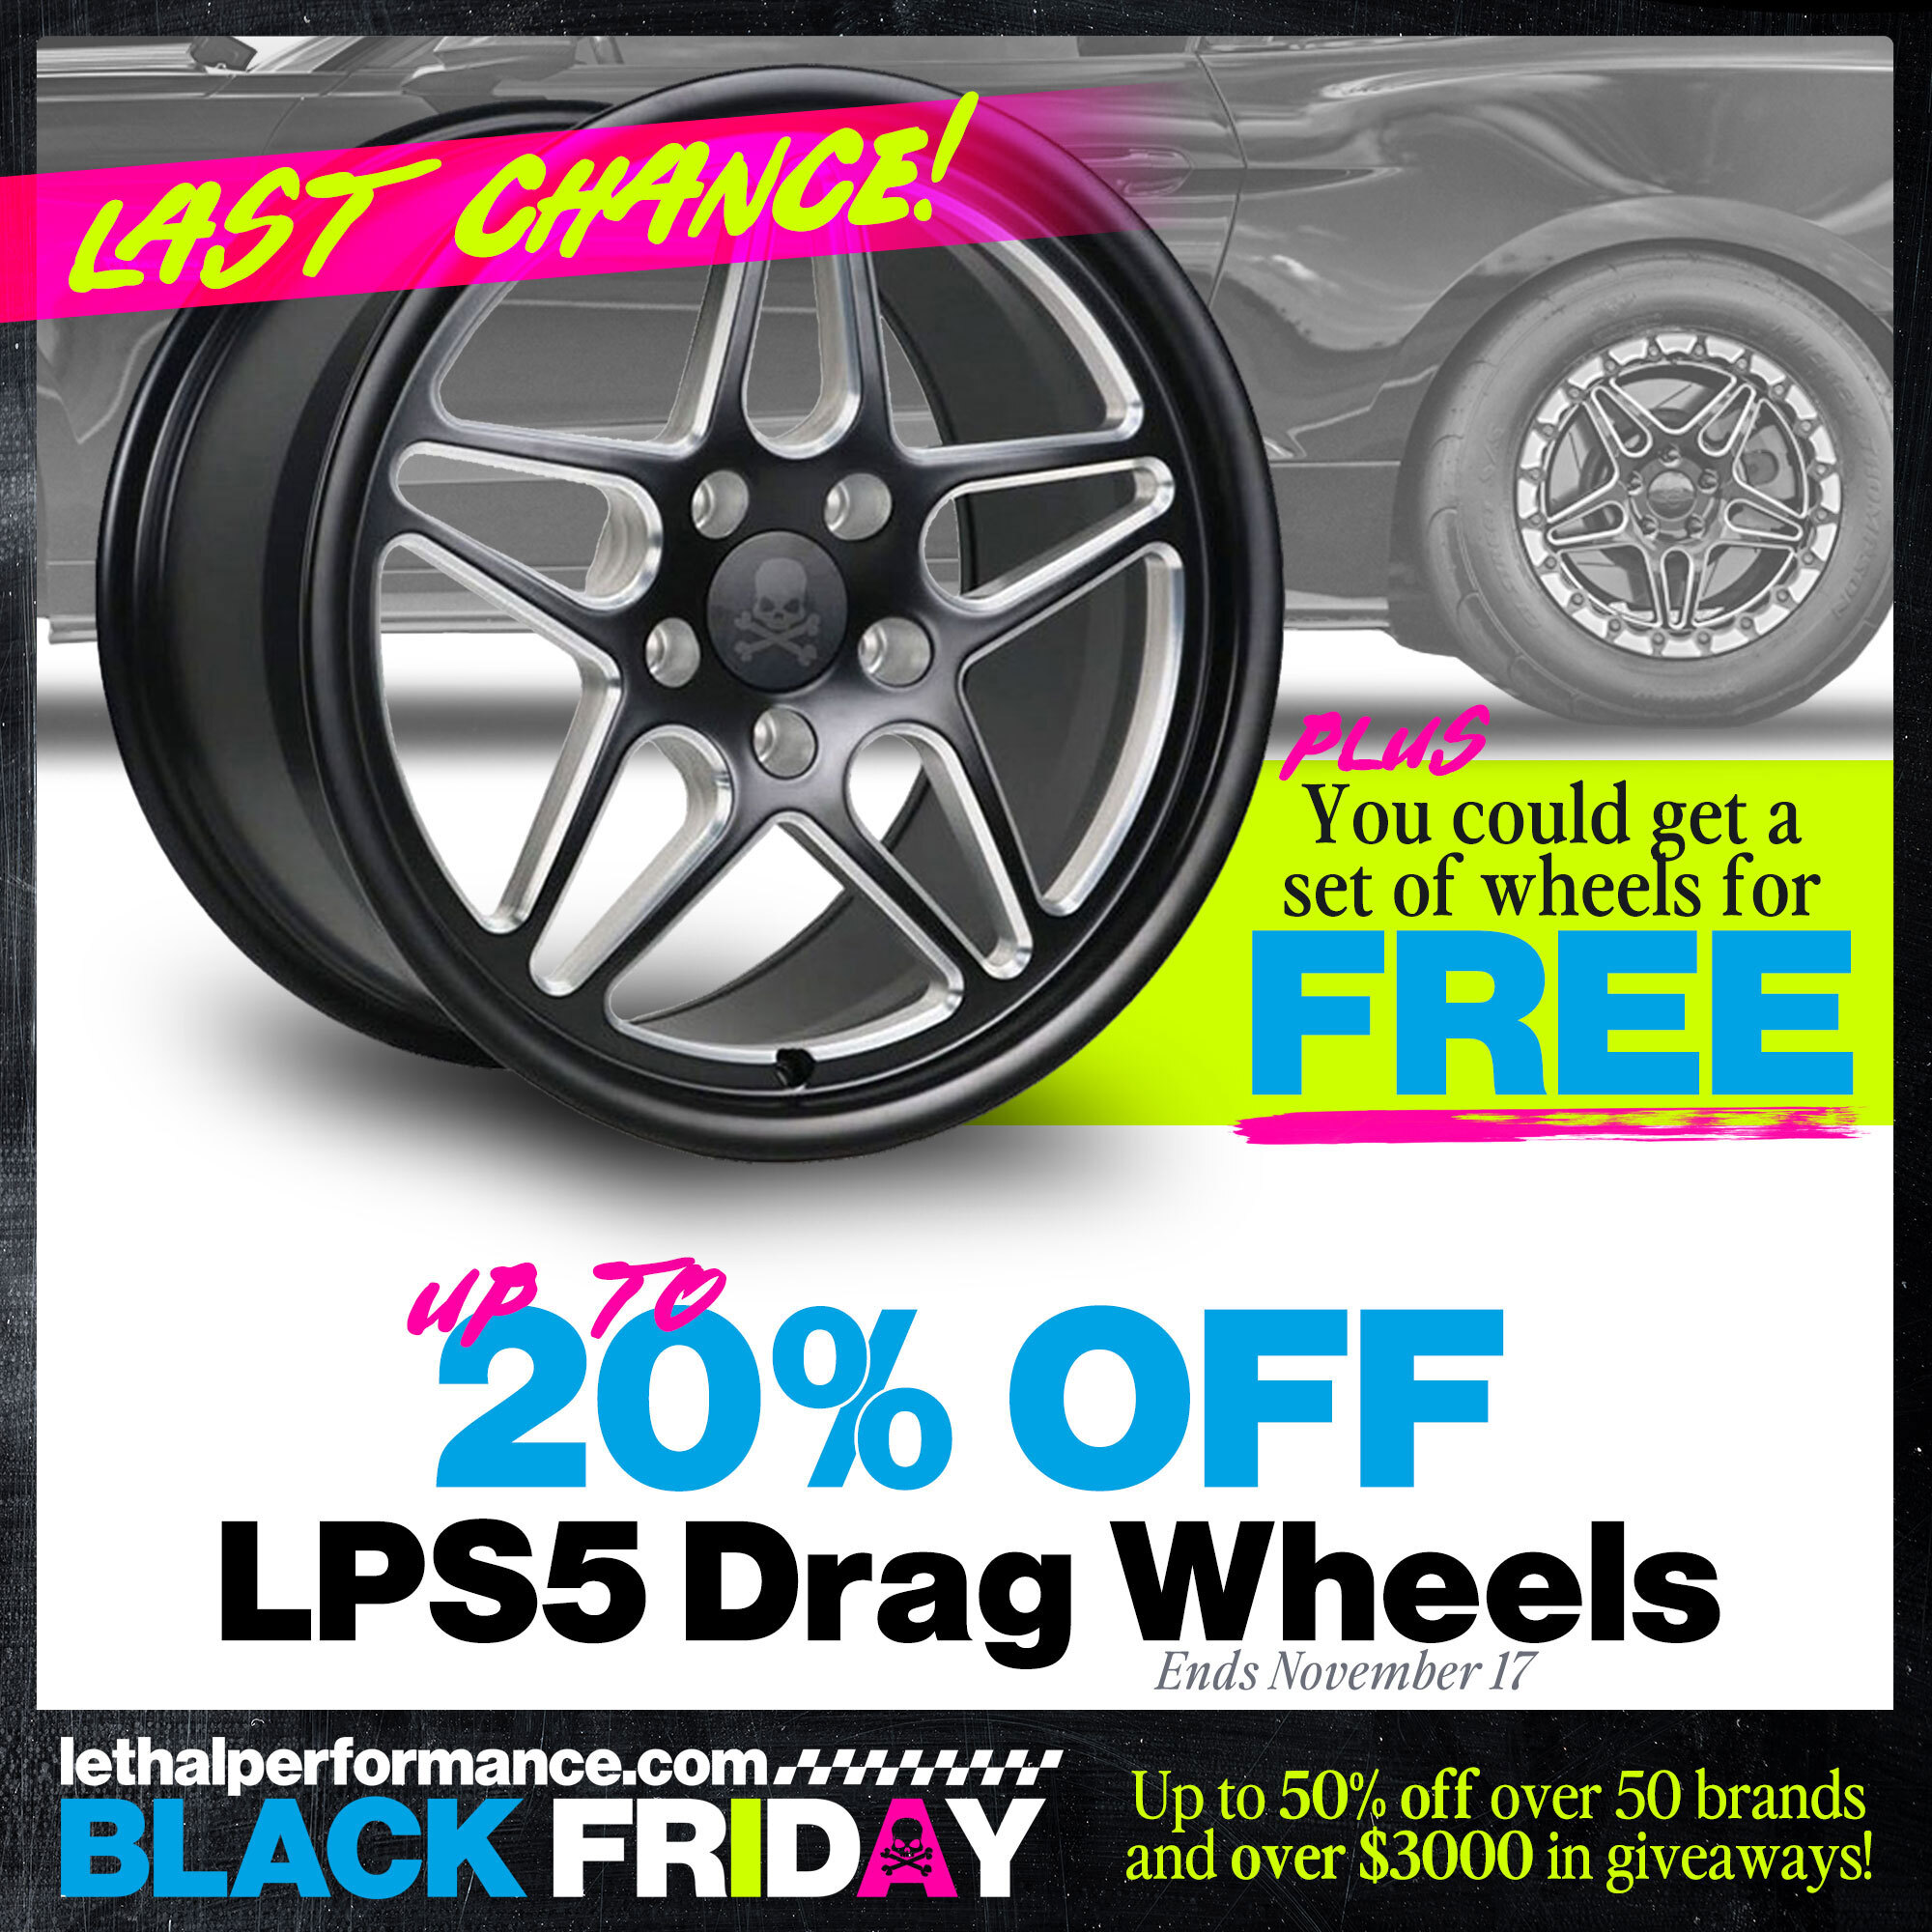 S650 Mustang Black Friday starts NOW! Up to 50% off! lps5_withgiveaway_LastChance